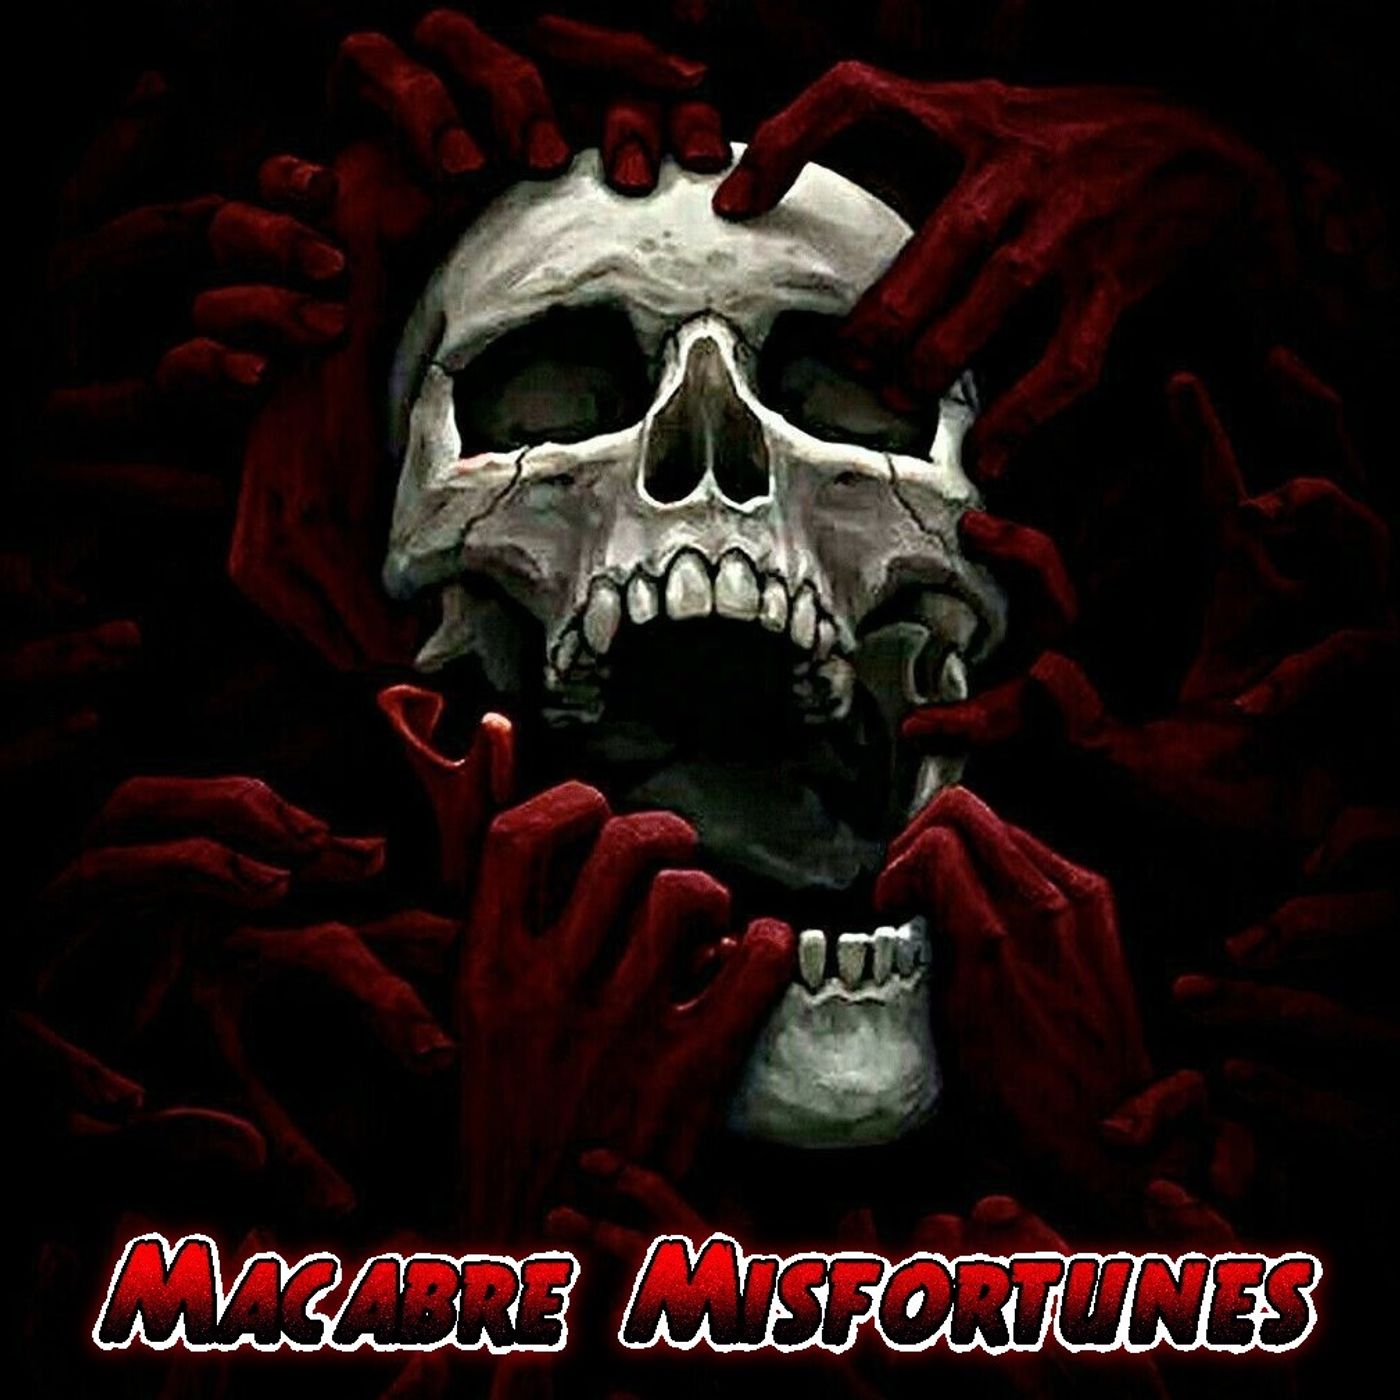 HHS Presents Macabre Misfortunes Ep 103 University of the South